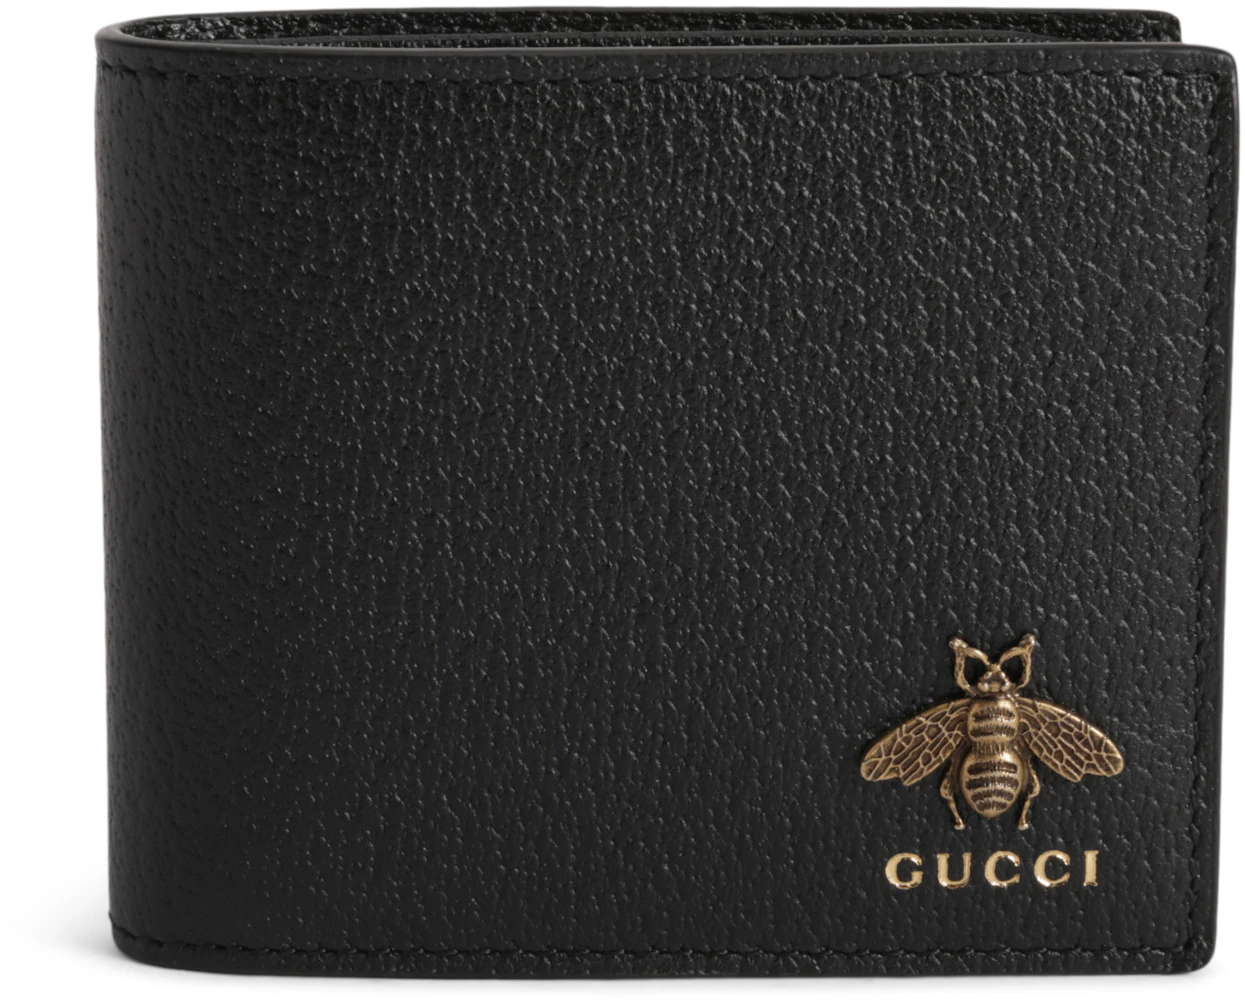 Gucci Animalier Leather Wallet - Black - Wallets